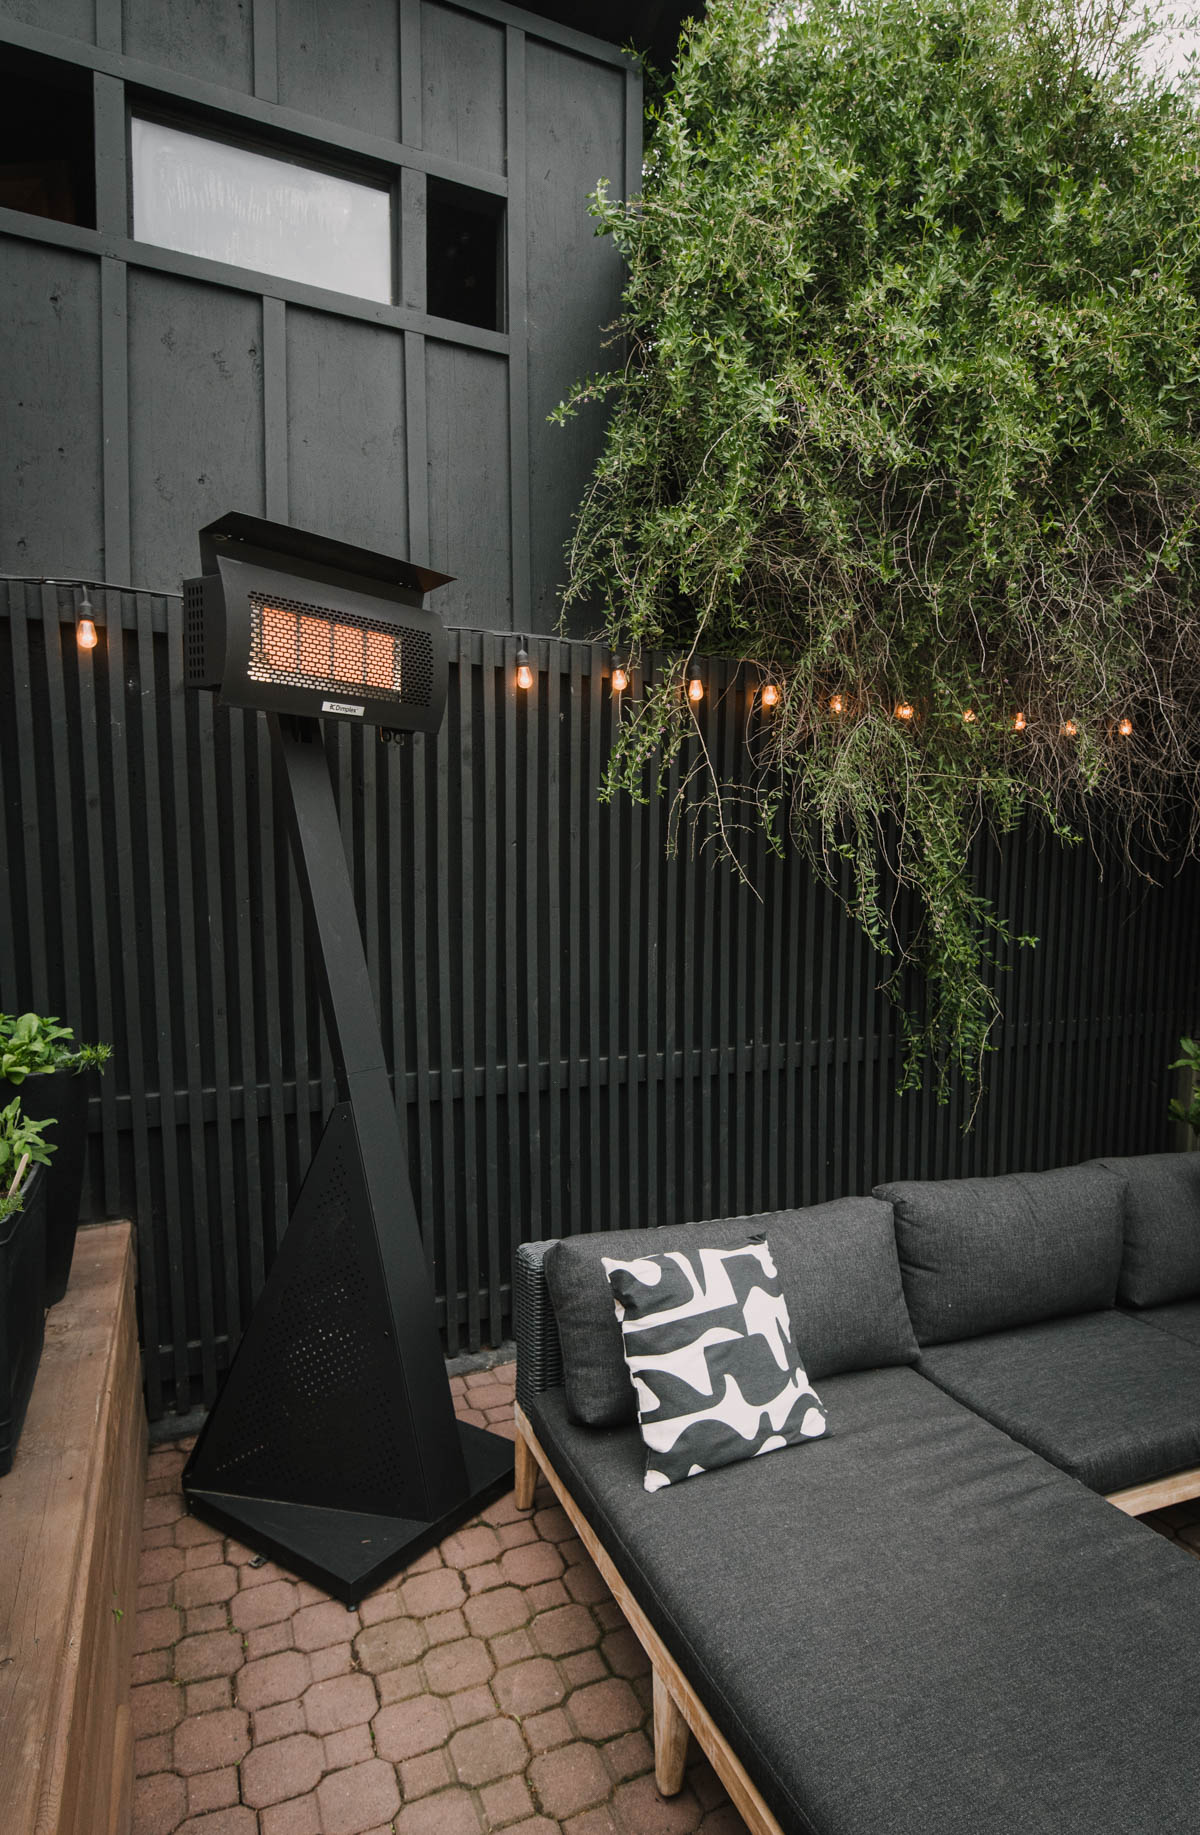 Lighting for an outdoor entertaining space